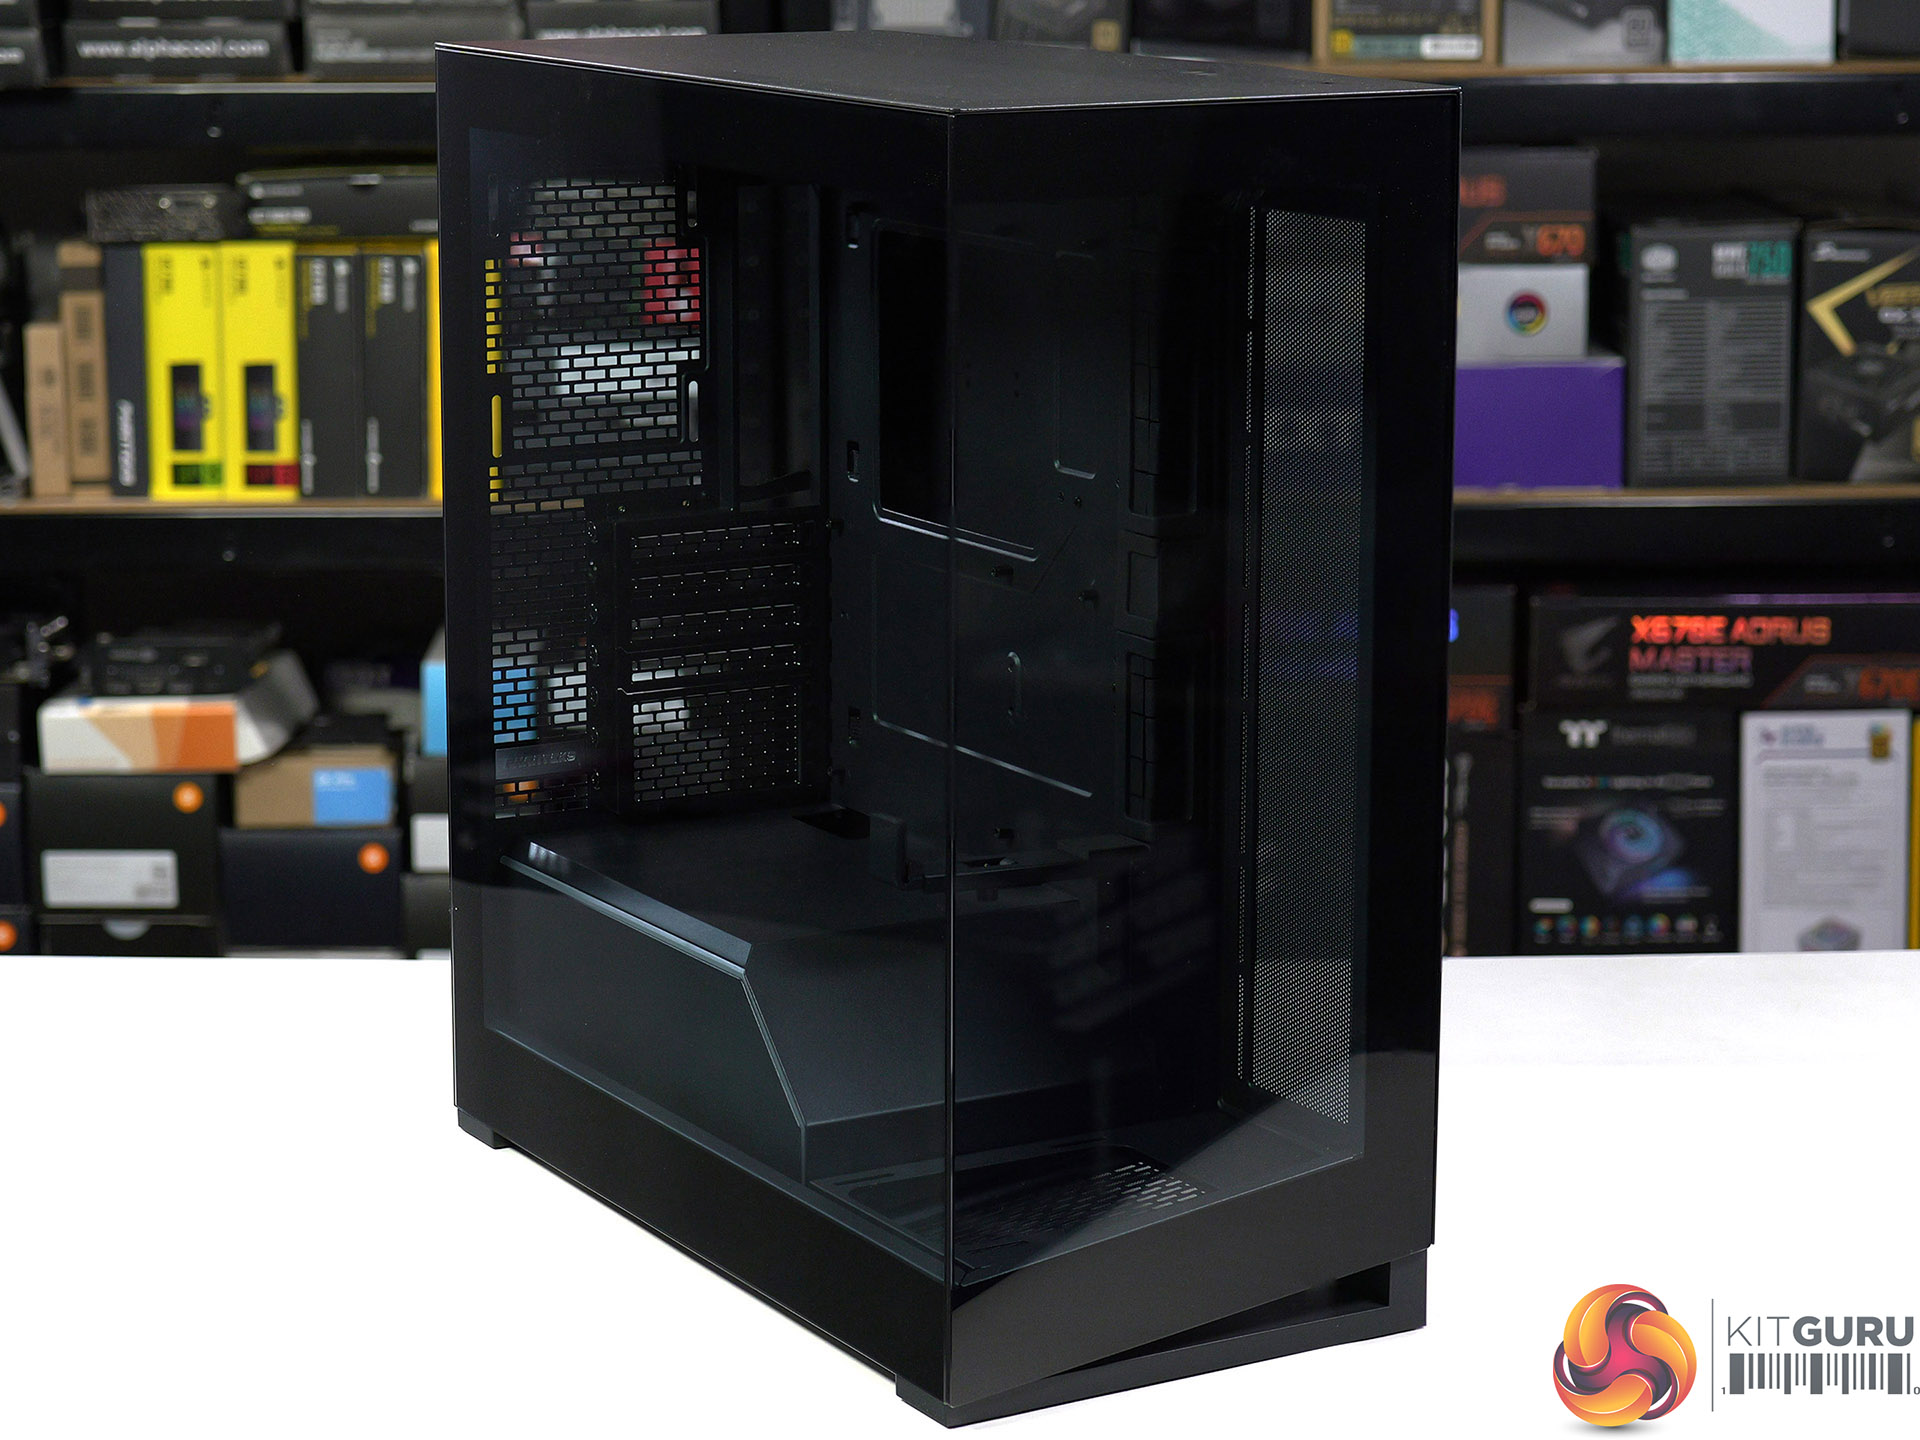 Phanteks NV5 Review – This case will fill you with eNVy